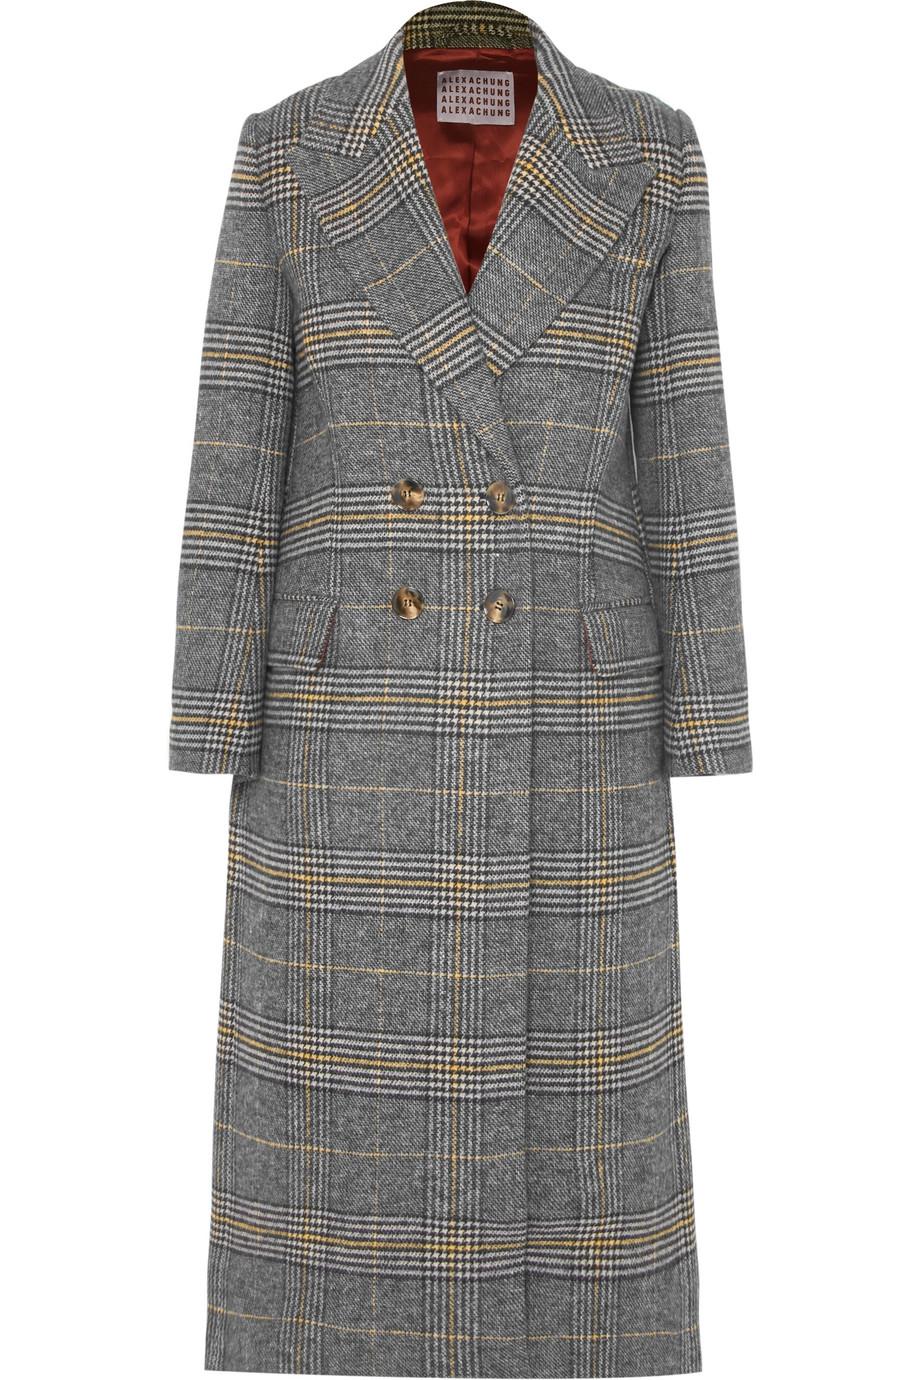 ALEXACHUNG Checked Tweed Coat in Gray | Lyst